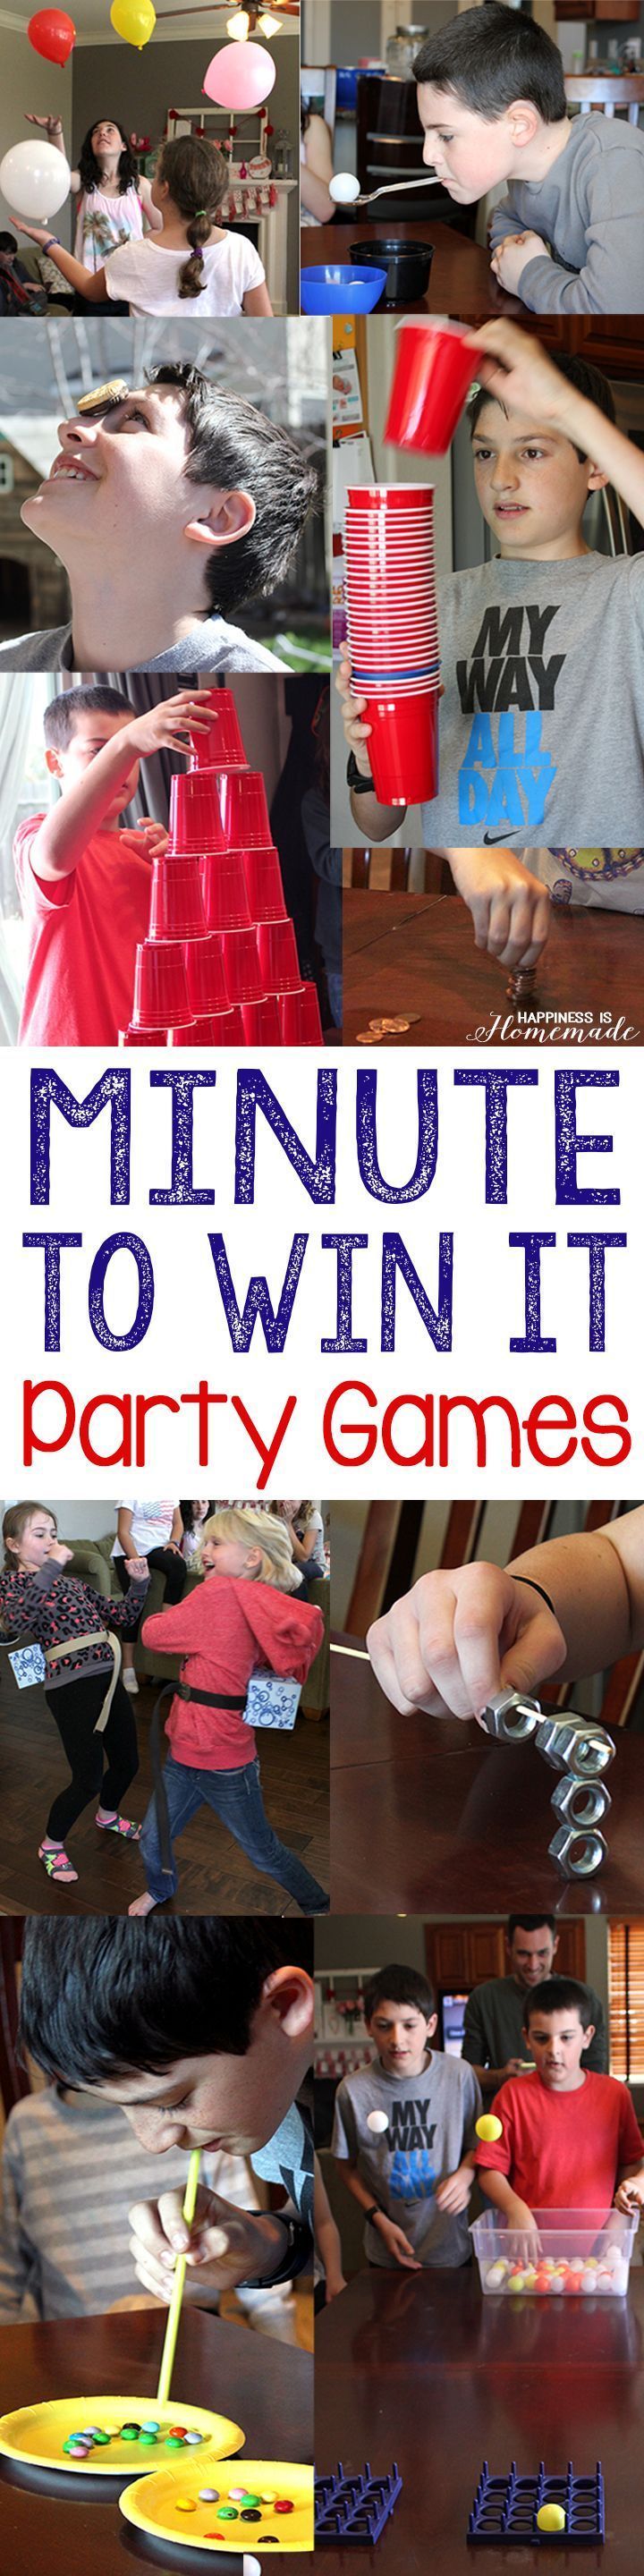 These 10 Minute to Win It games were perfect for all ages (we had guests from ages 4-55 playing these games, and everyone had a